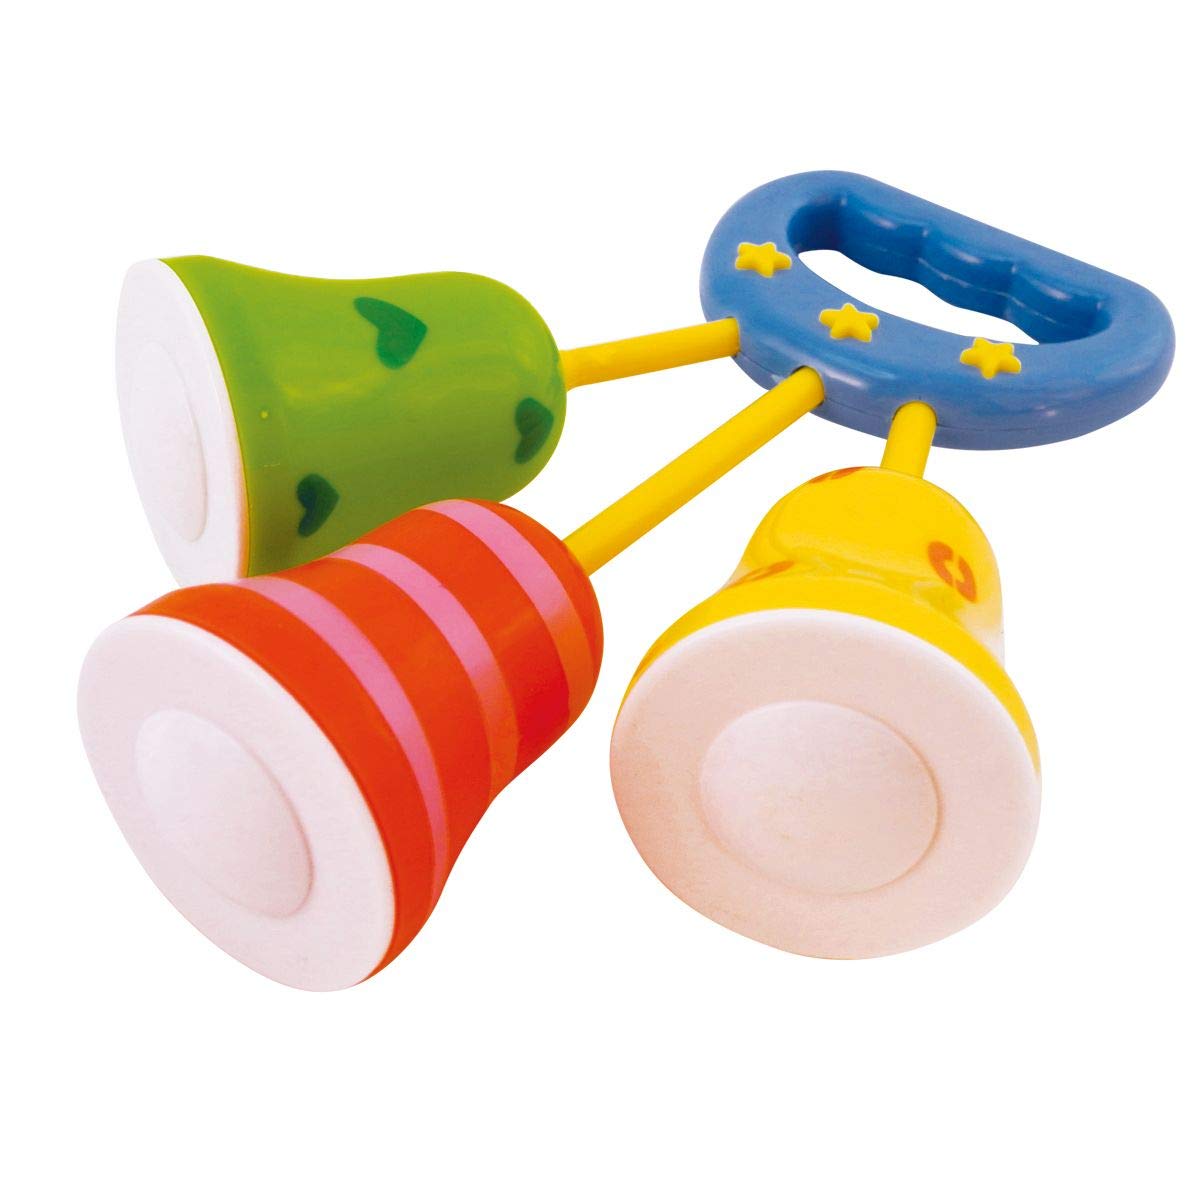 Bieco 41002136 Baby Toy Rattle Bell with Handle and 3 Bells Colourful Rattles Colourful Stem Rattle for Babies from 3M+, Multi-Coloured